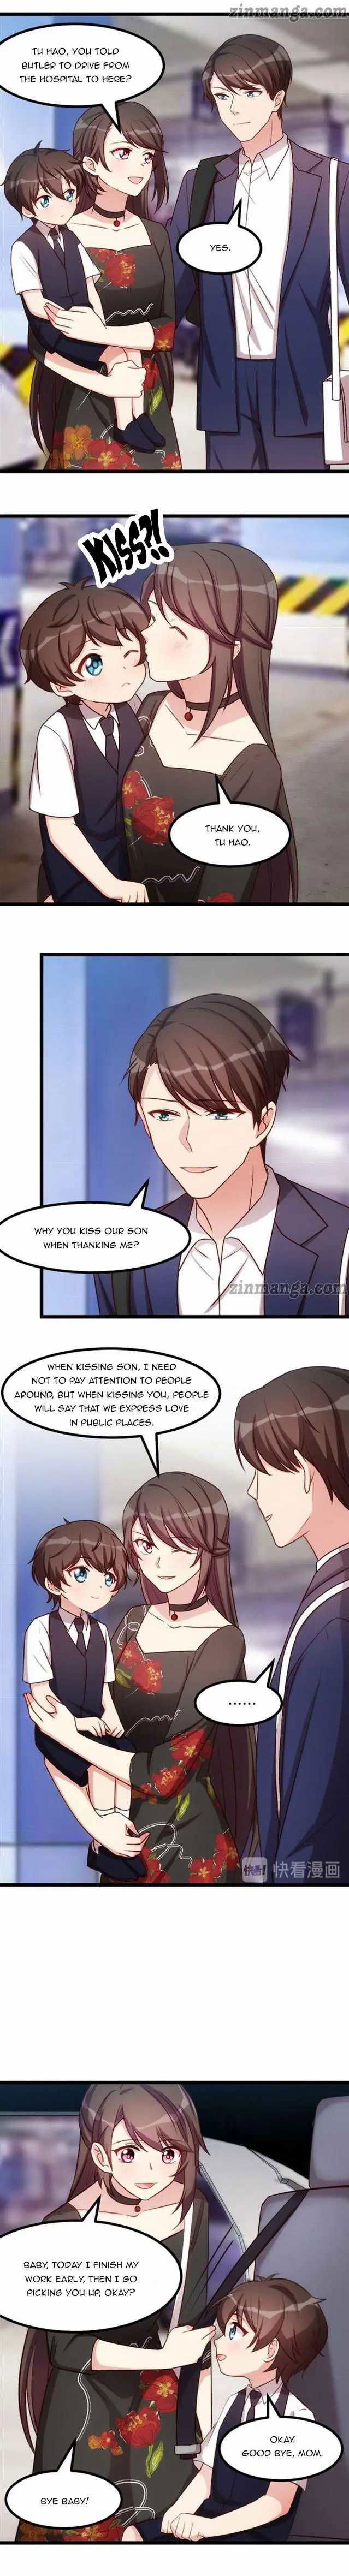 CEO's Sudden Proposal Chapter 231 page 2